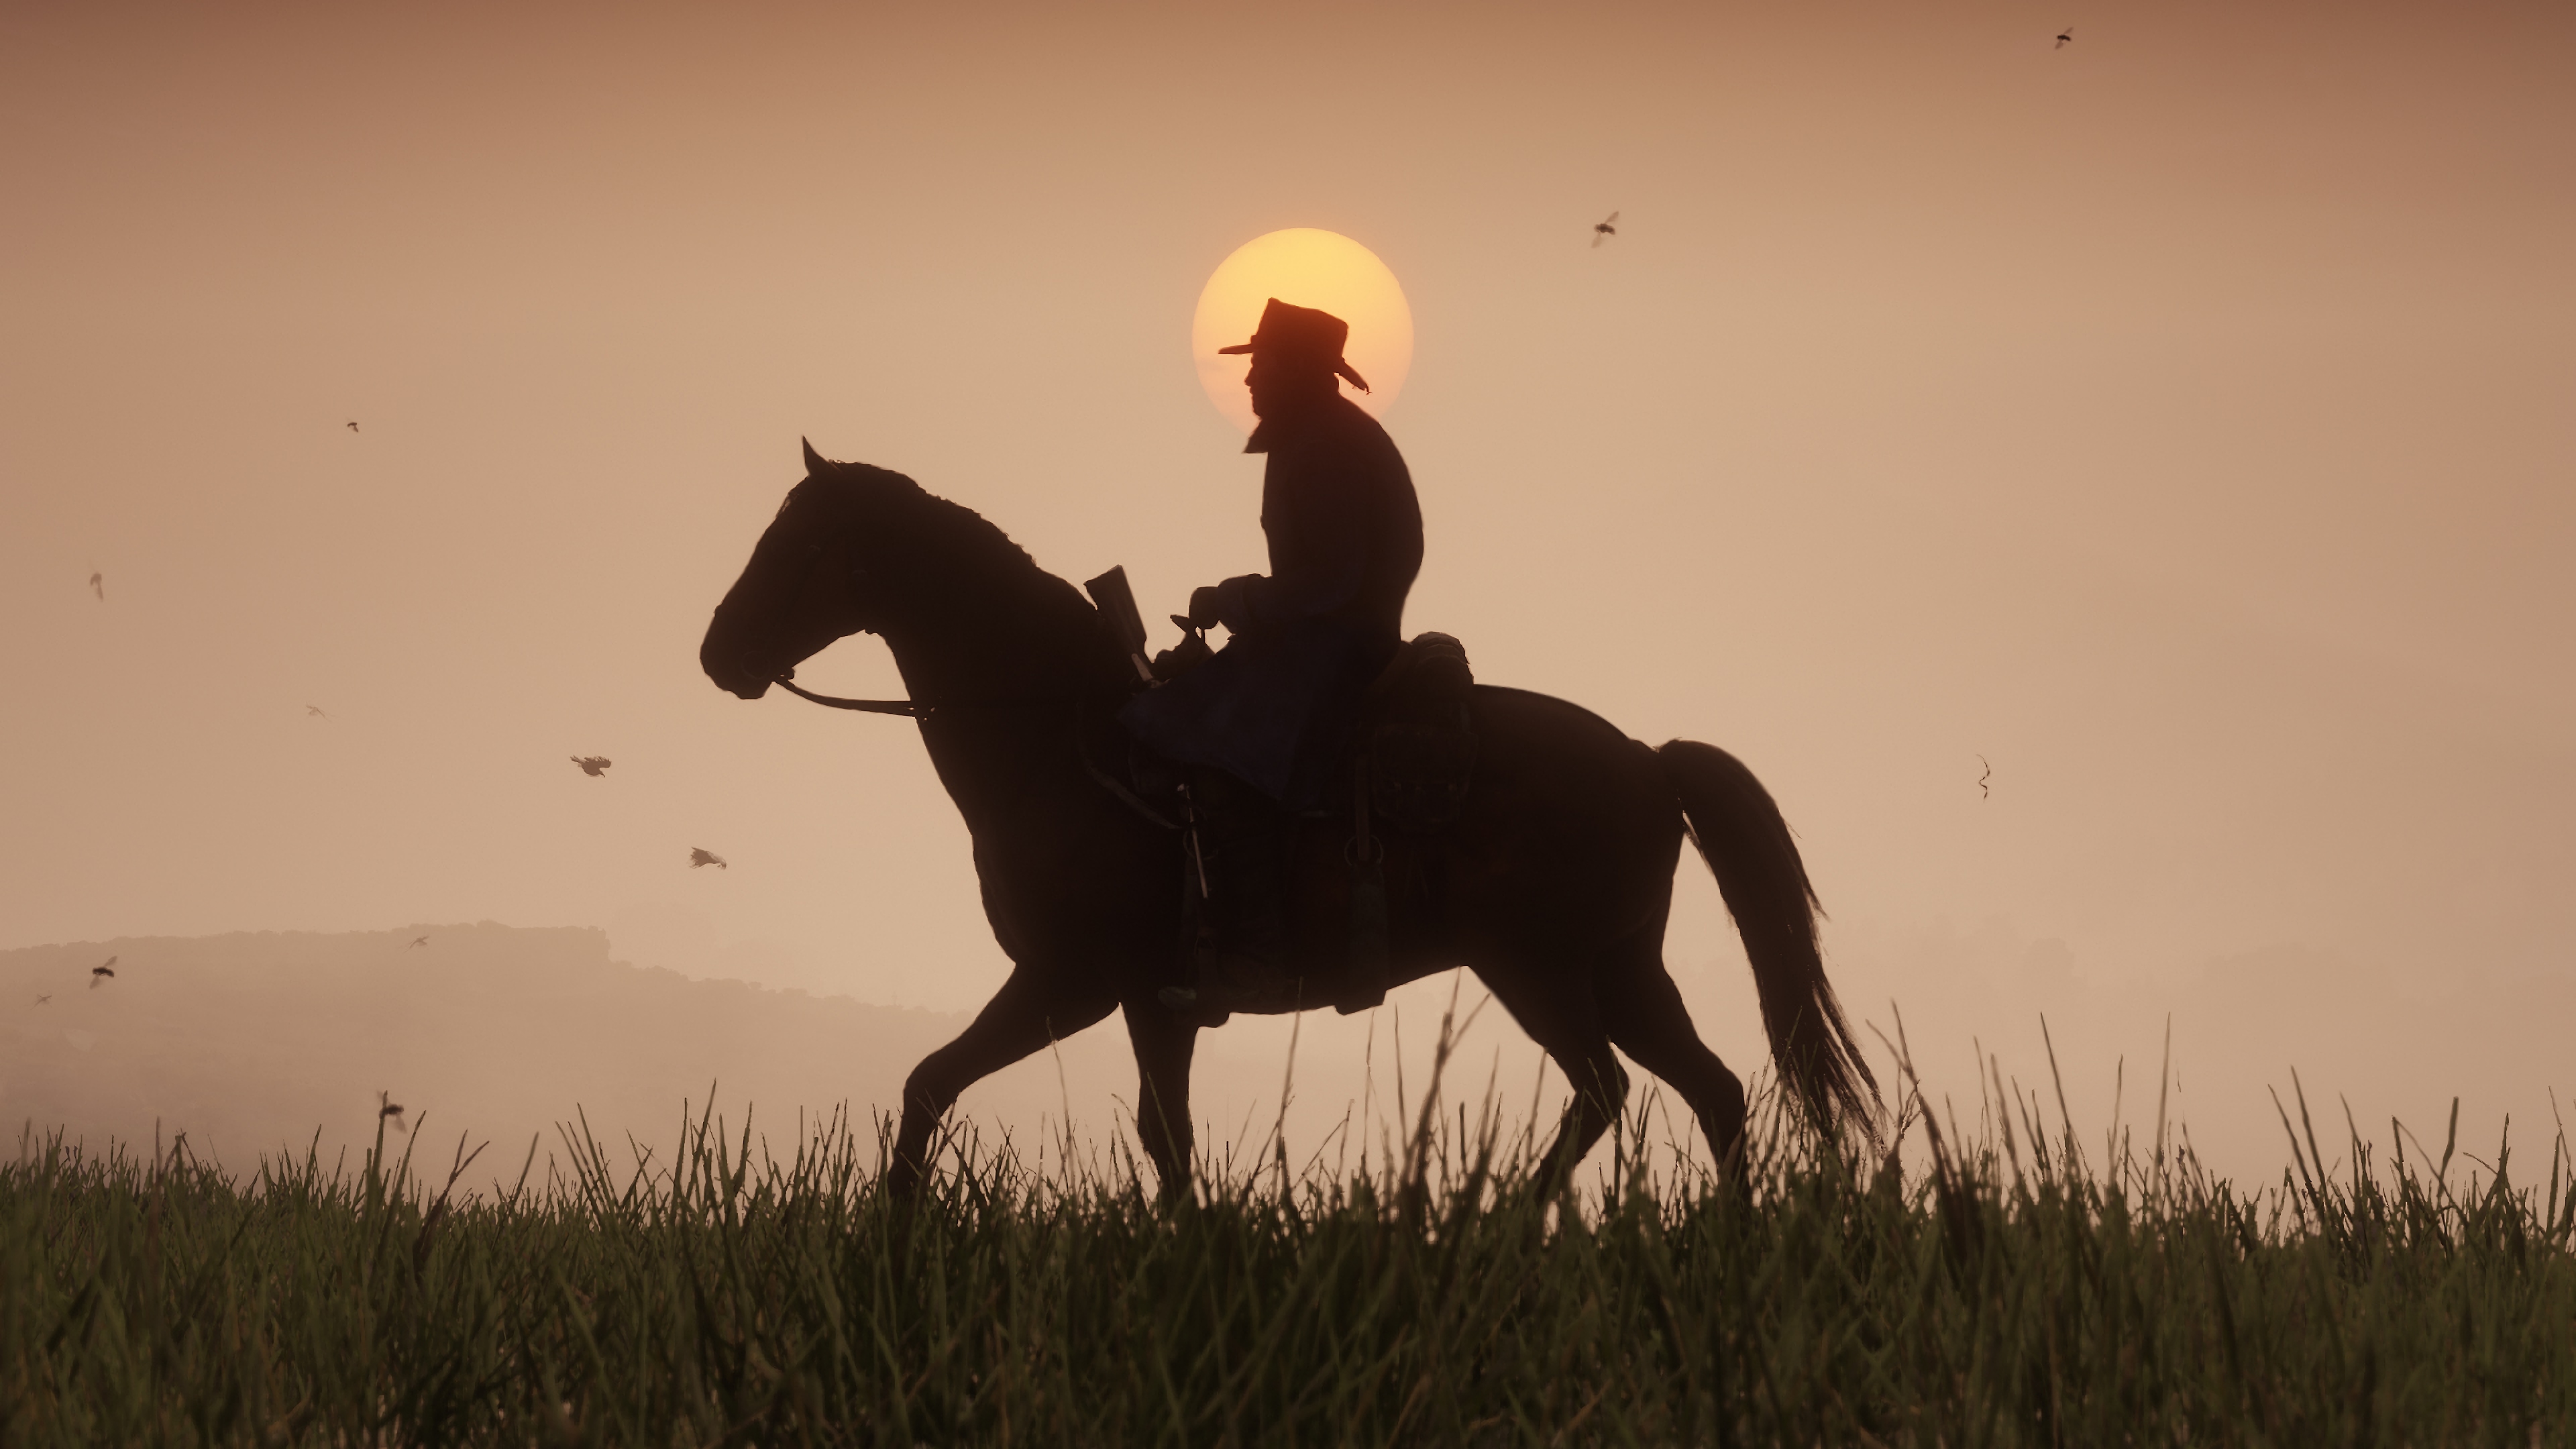 Wallpapers the 2018 Games red dead redemption 2 computer games on the desktop